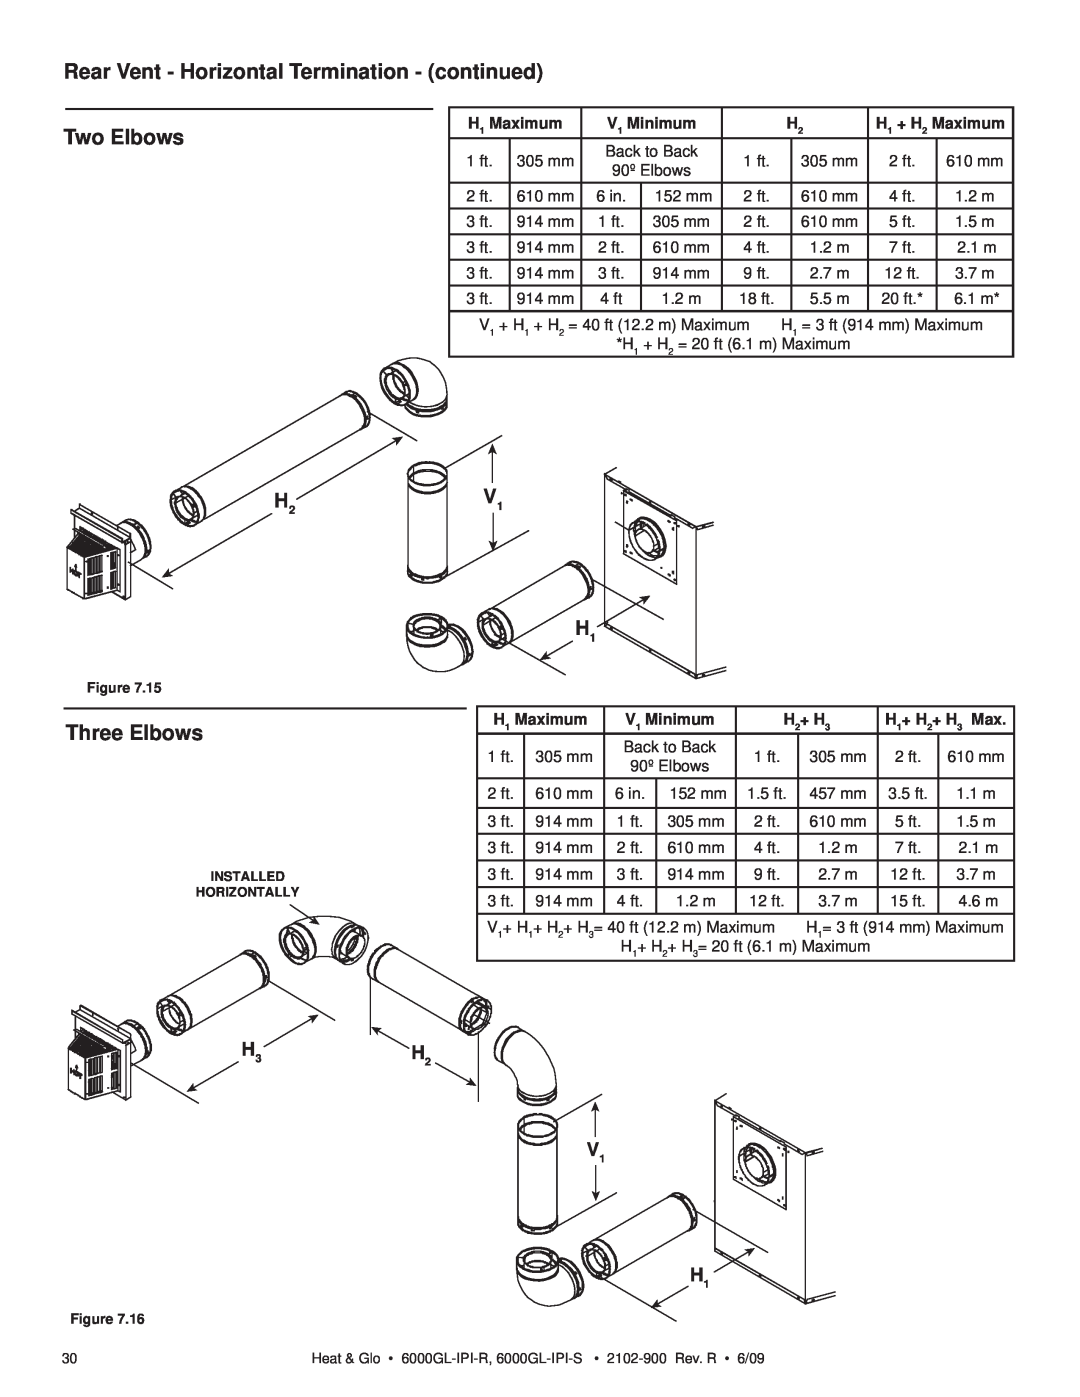 Heat & Glo LifeStyle 6000GL-IPILP-S Rear Vent - Horizontal Termination - continued, Two Elbows, Three Elbows, V1 H1 